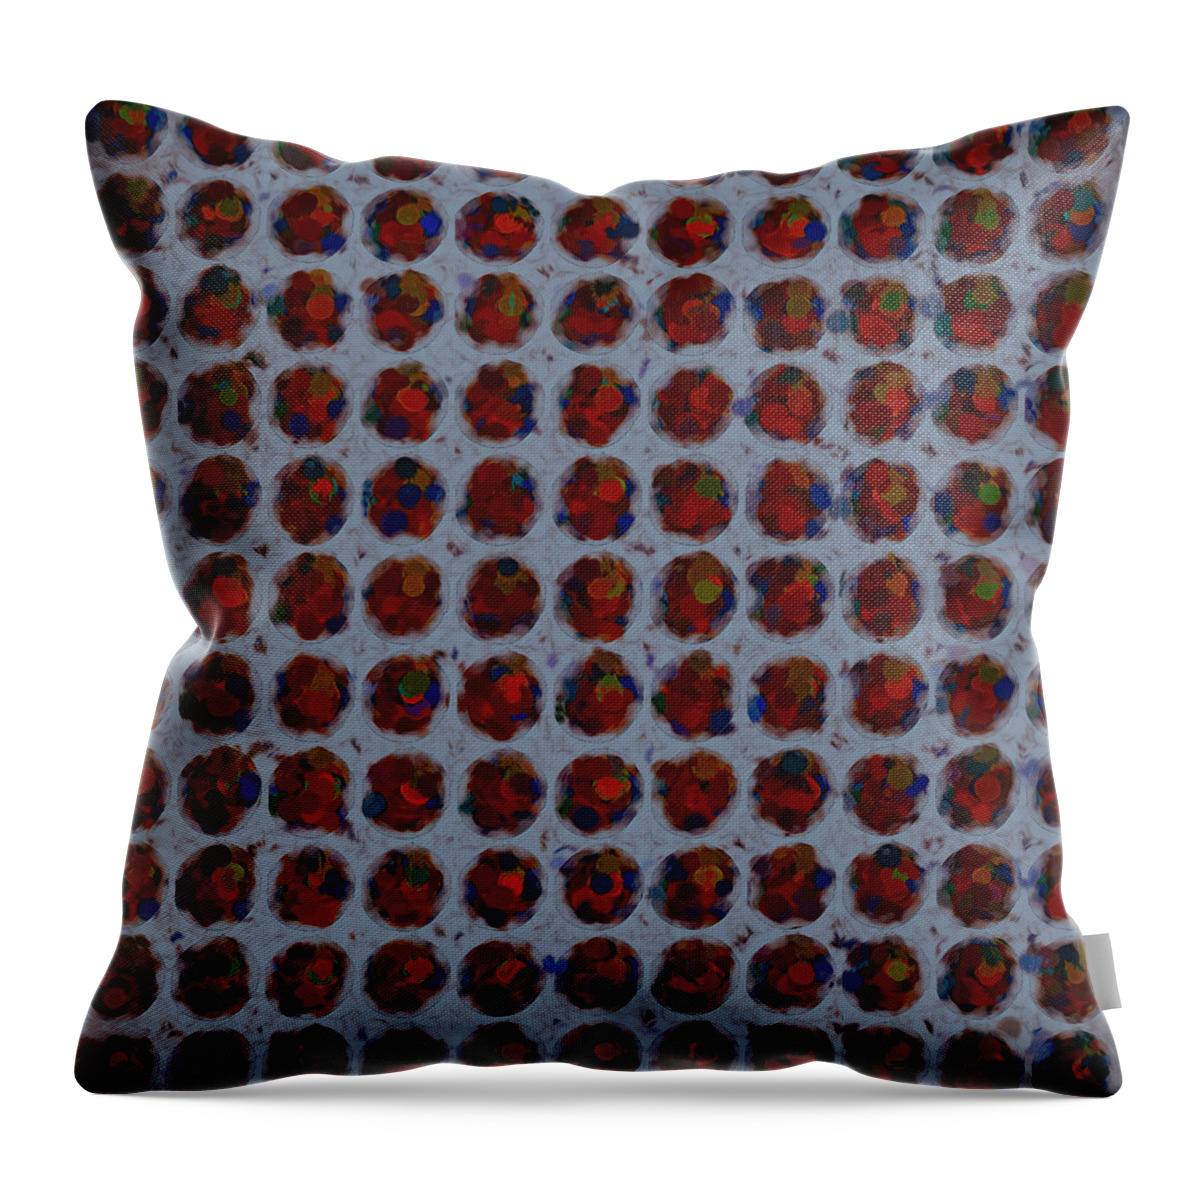 Patterns Throw Pillow featuring the digital art Patterned Red by Cathy Anderson